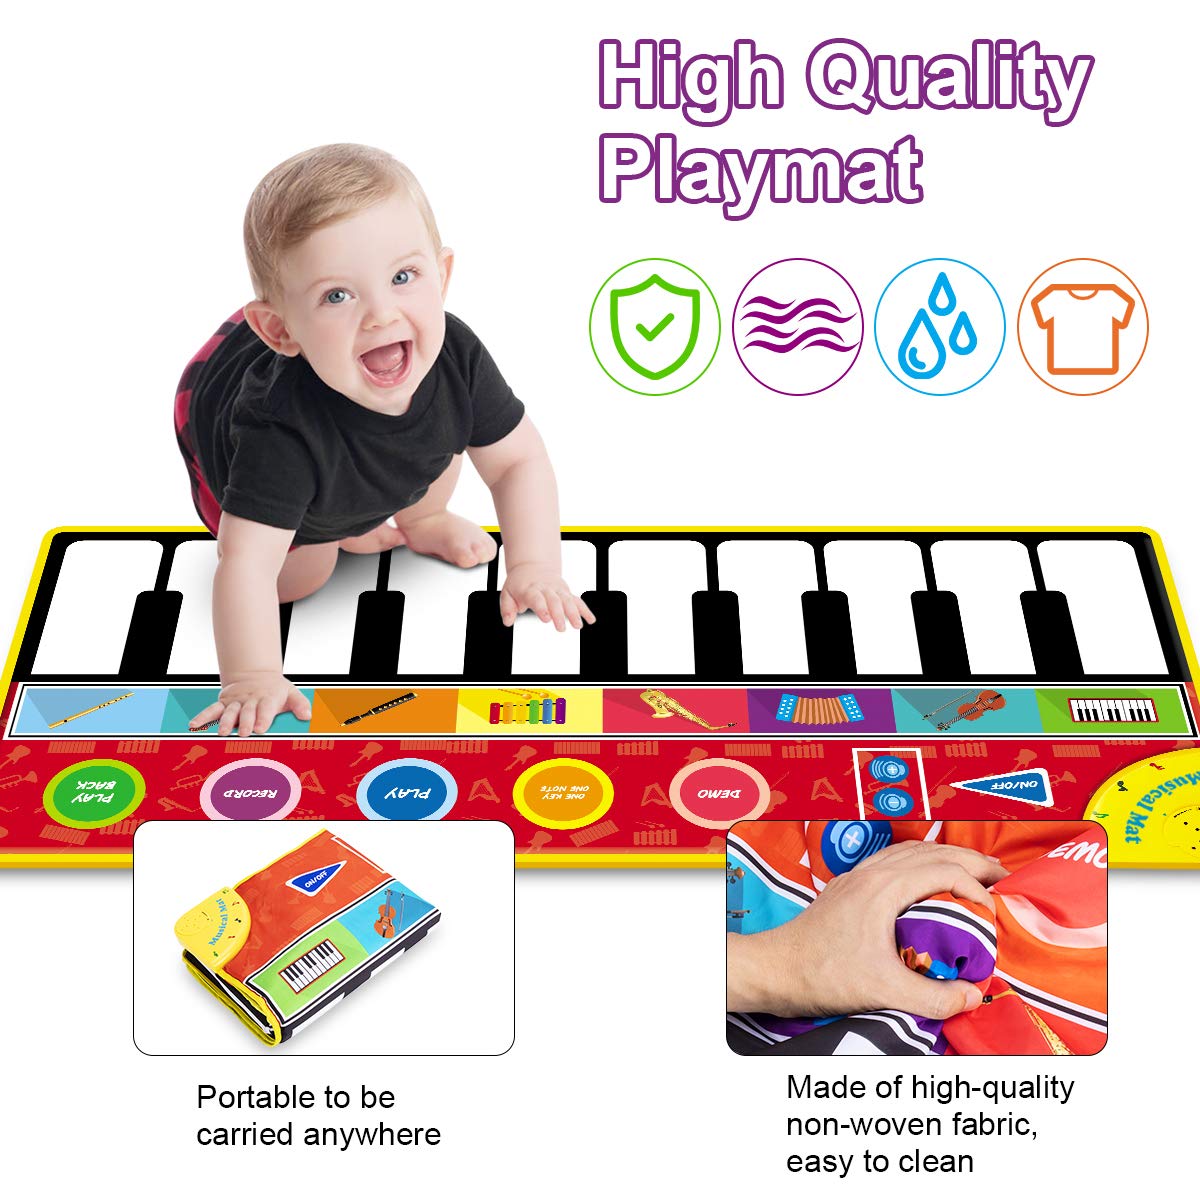 Tencoz Kids Musical Mats, 58.26” x 23.62” Large Musical Dance Toys for Toddlers, 10 Keys Piano Mat with 8 Selectable Musical Instruments Toys gifts for kids